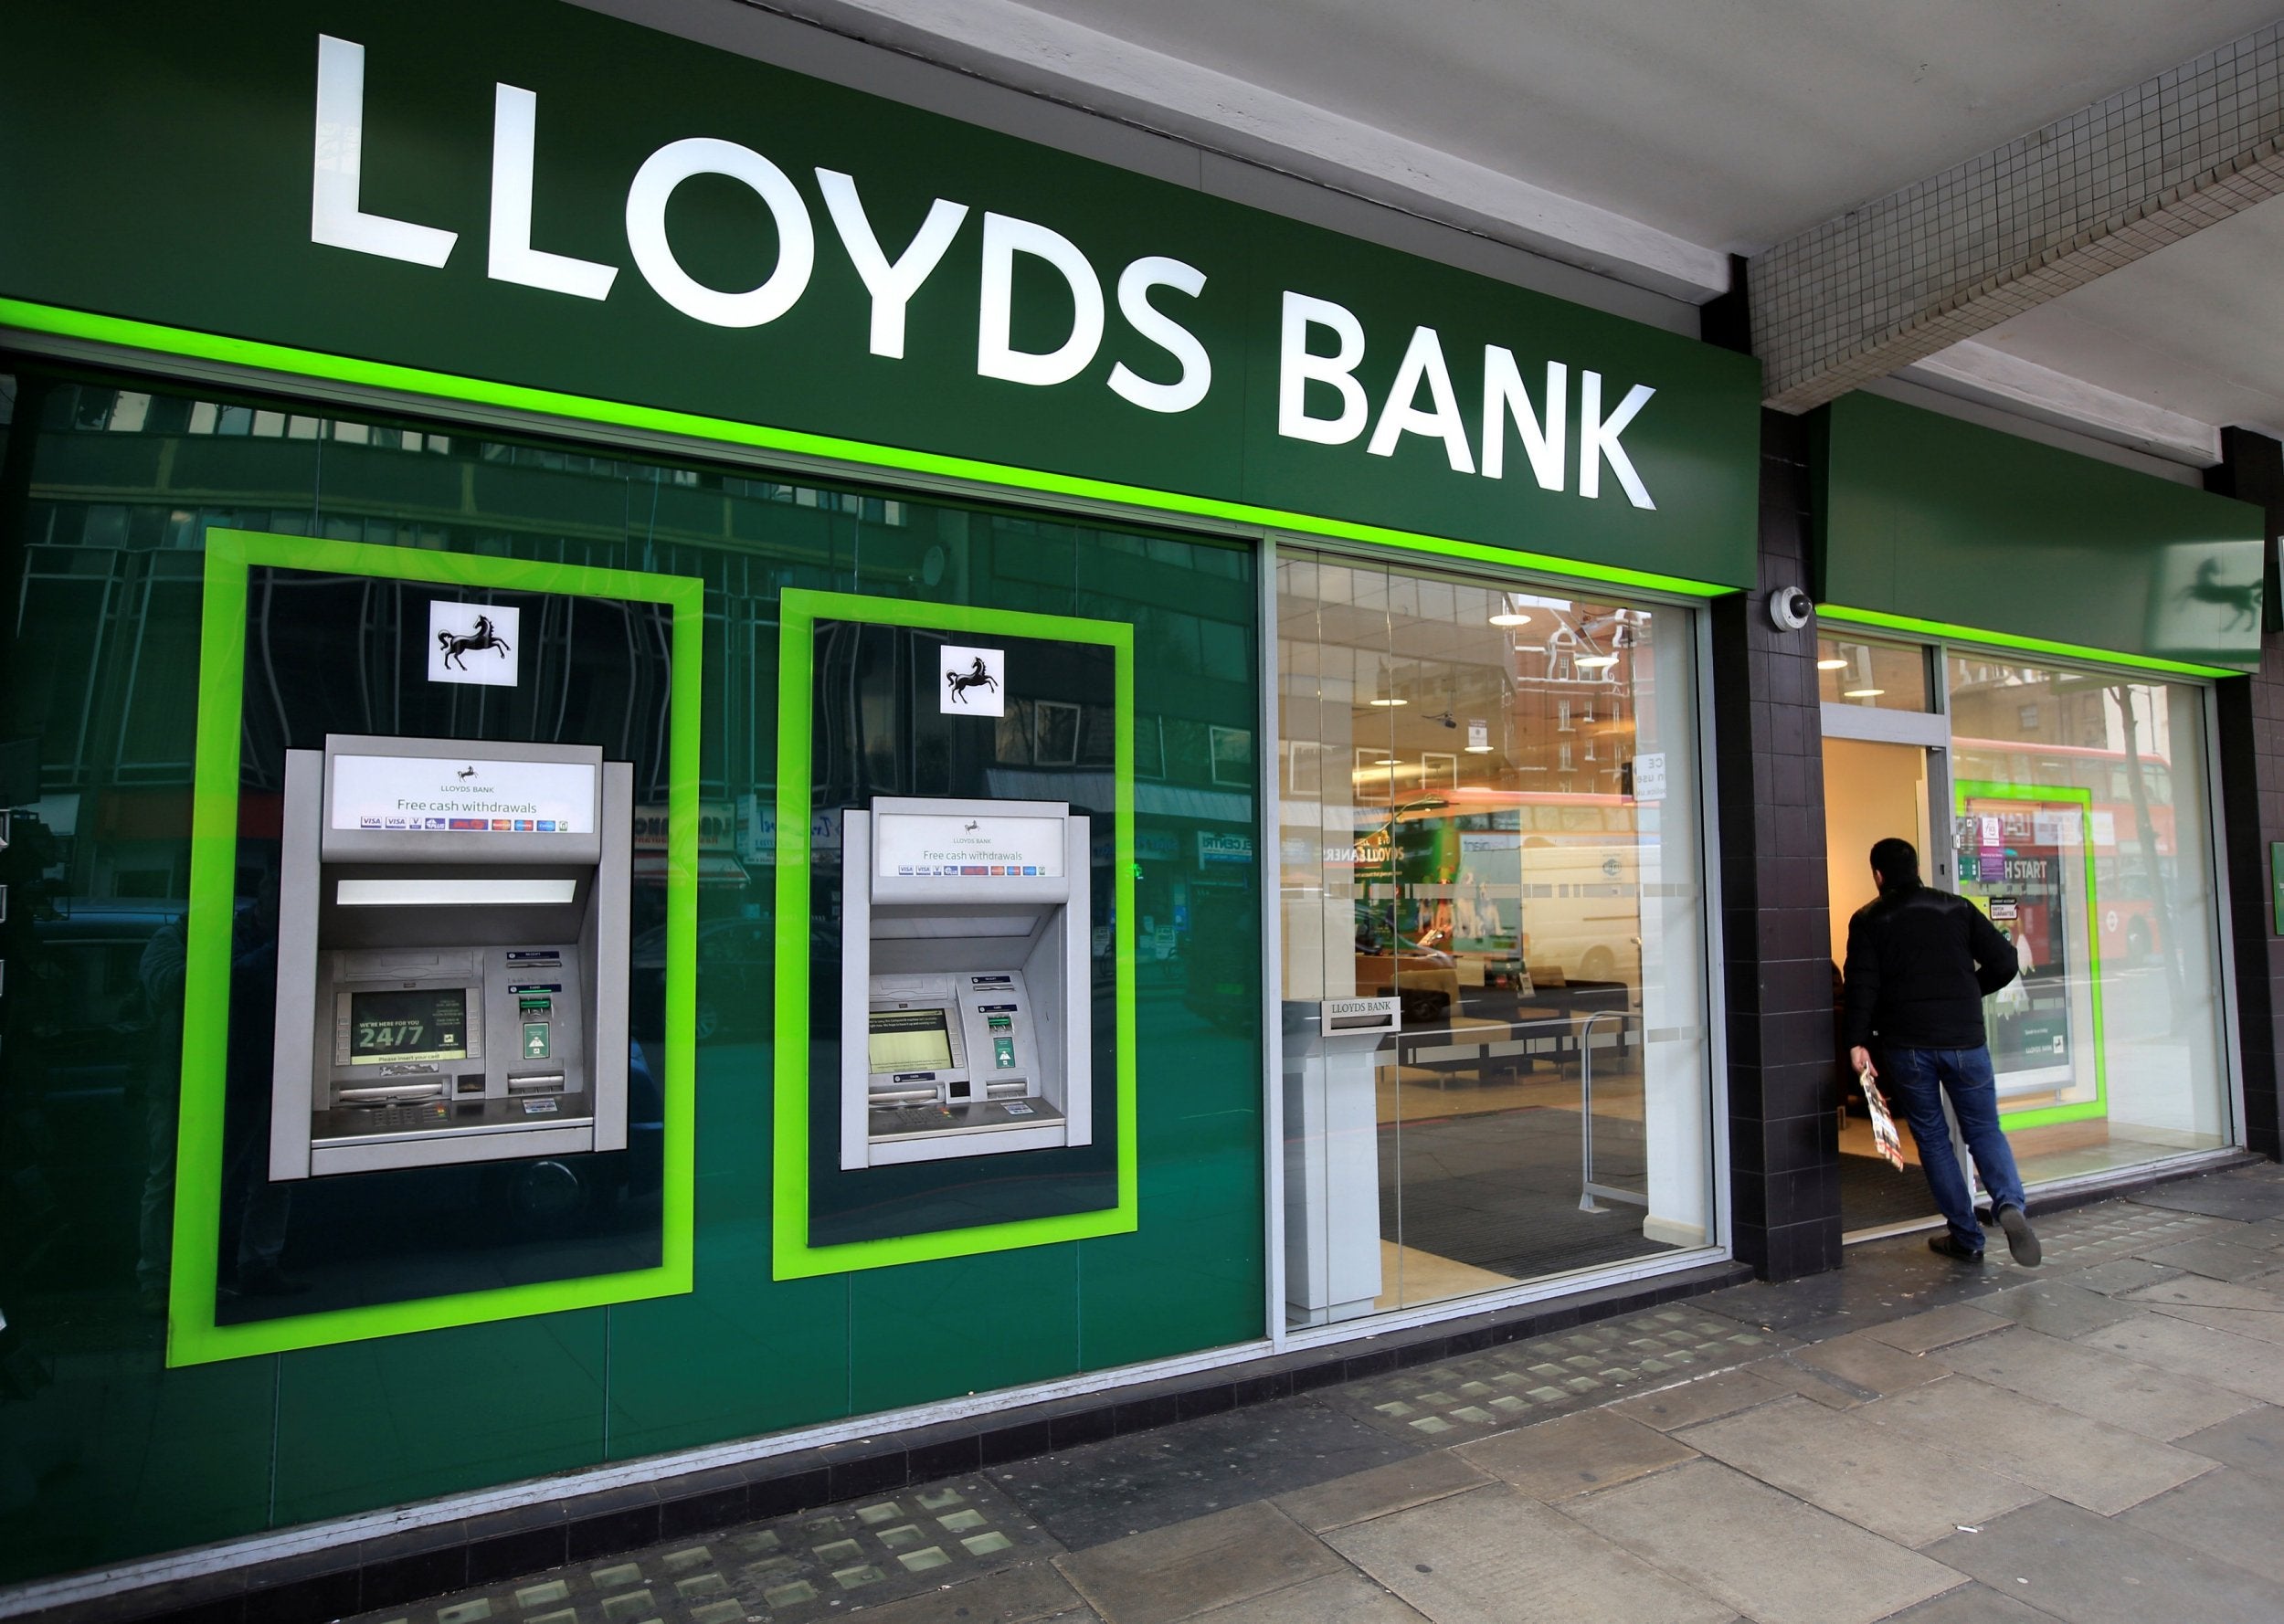 Lloyds has slashed more than 10,000 jobs since the government sold its stake in the bailed out bank in 2017